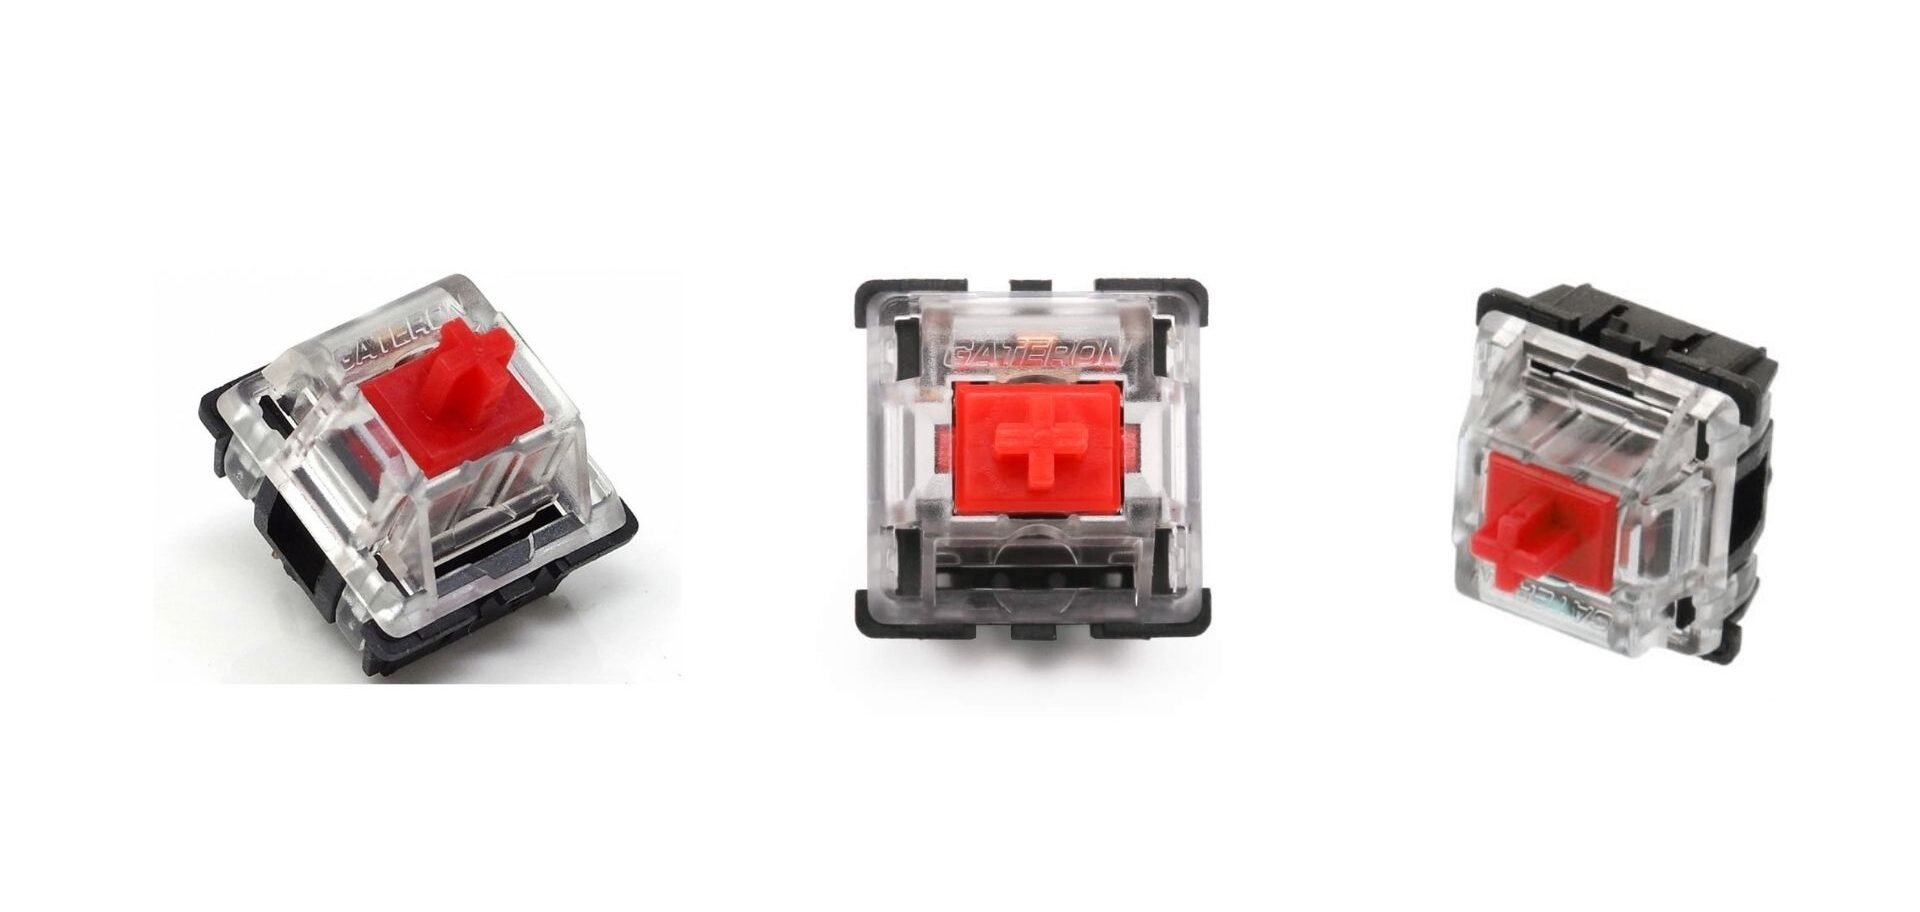 gateron red vs cherry red-1